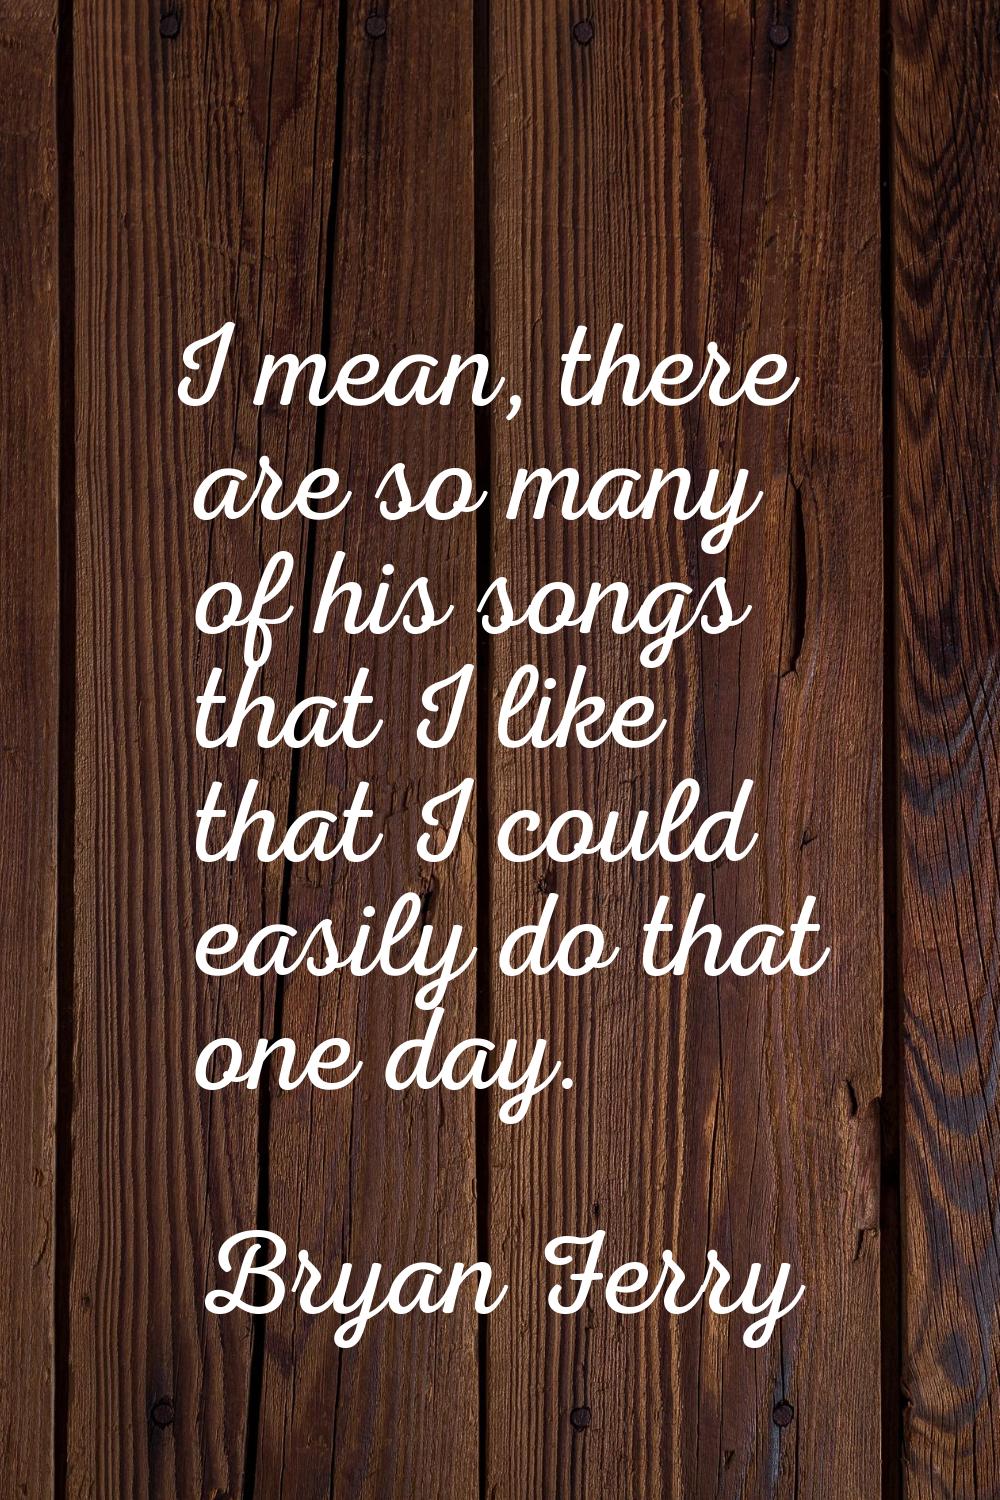 I mean, there are so many of his songs that I like that I could easily do that one day.